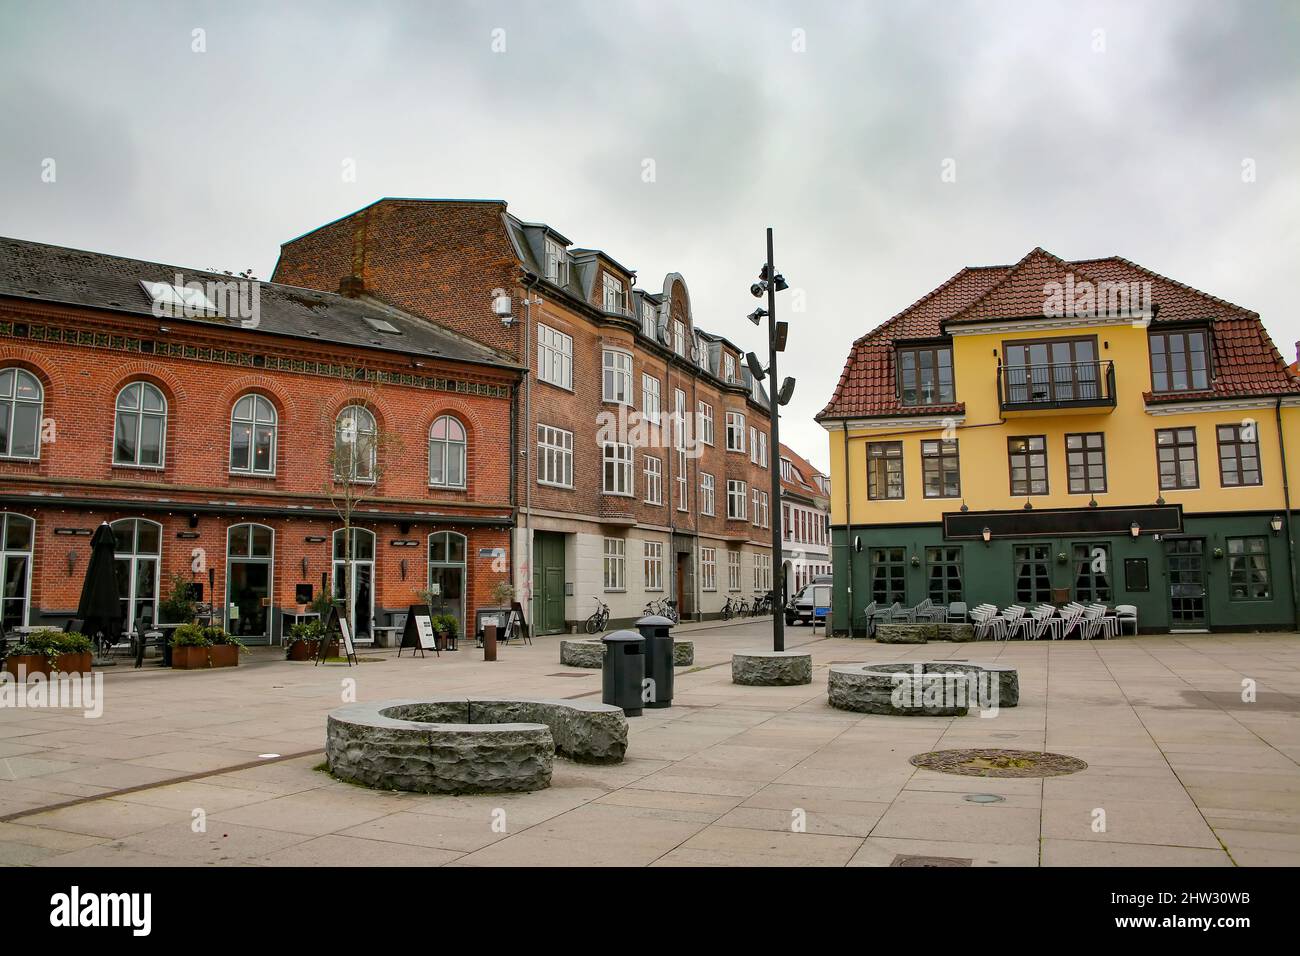 Historic buildings including shops, bars and restaurants surrounding Toldbod Plads square which is located in the heart of Aalborg near the waterfront Stock Photo